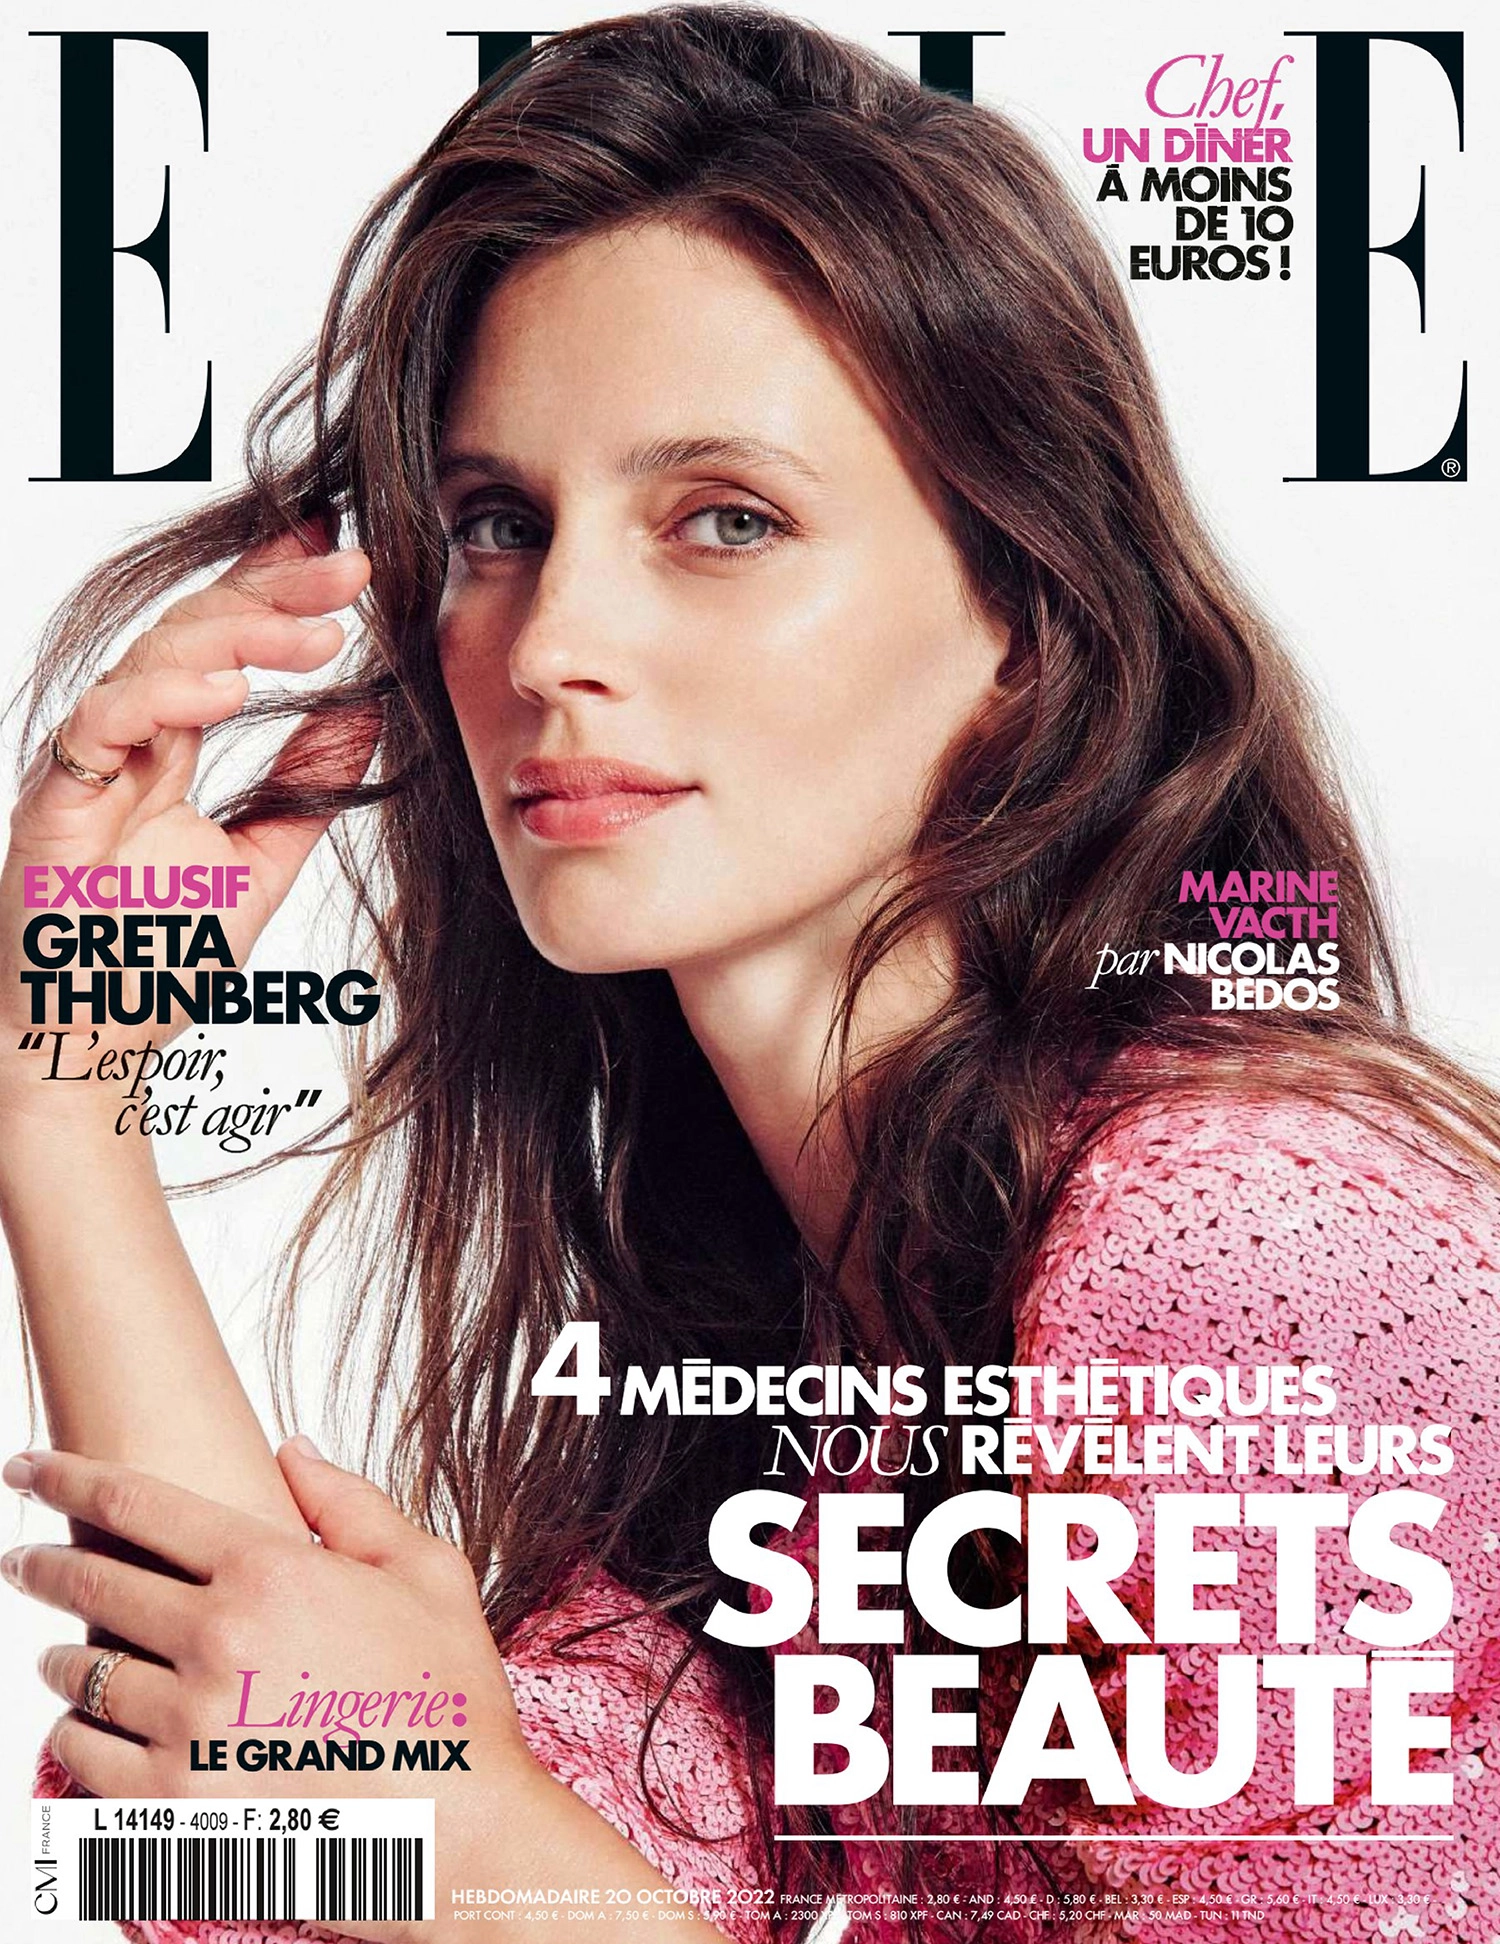 Marine Vacth covers Elle France October 20th, 2022 by Sofia Sanchez & Mauro Mongiello